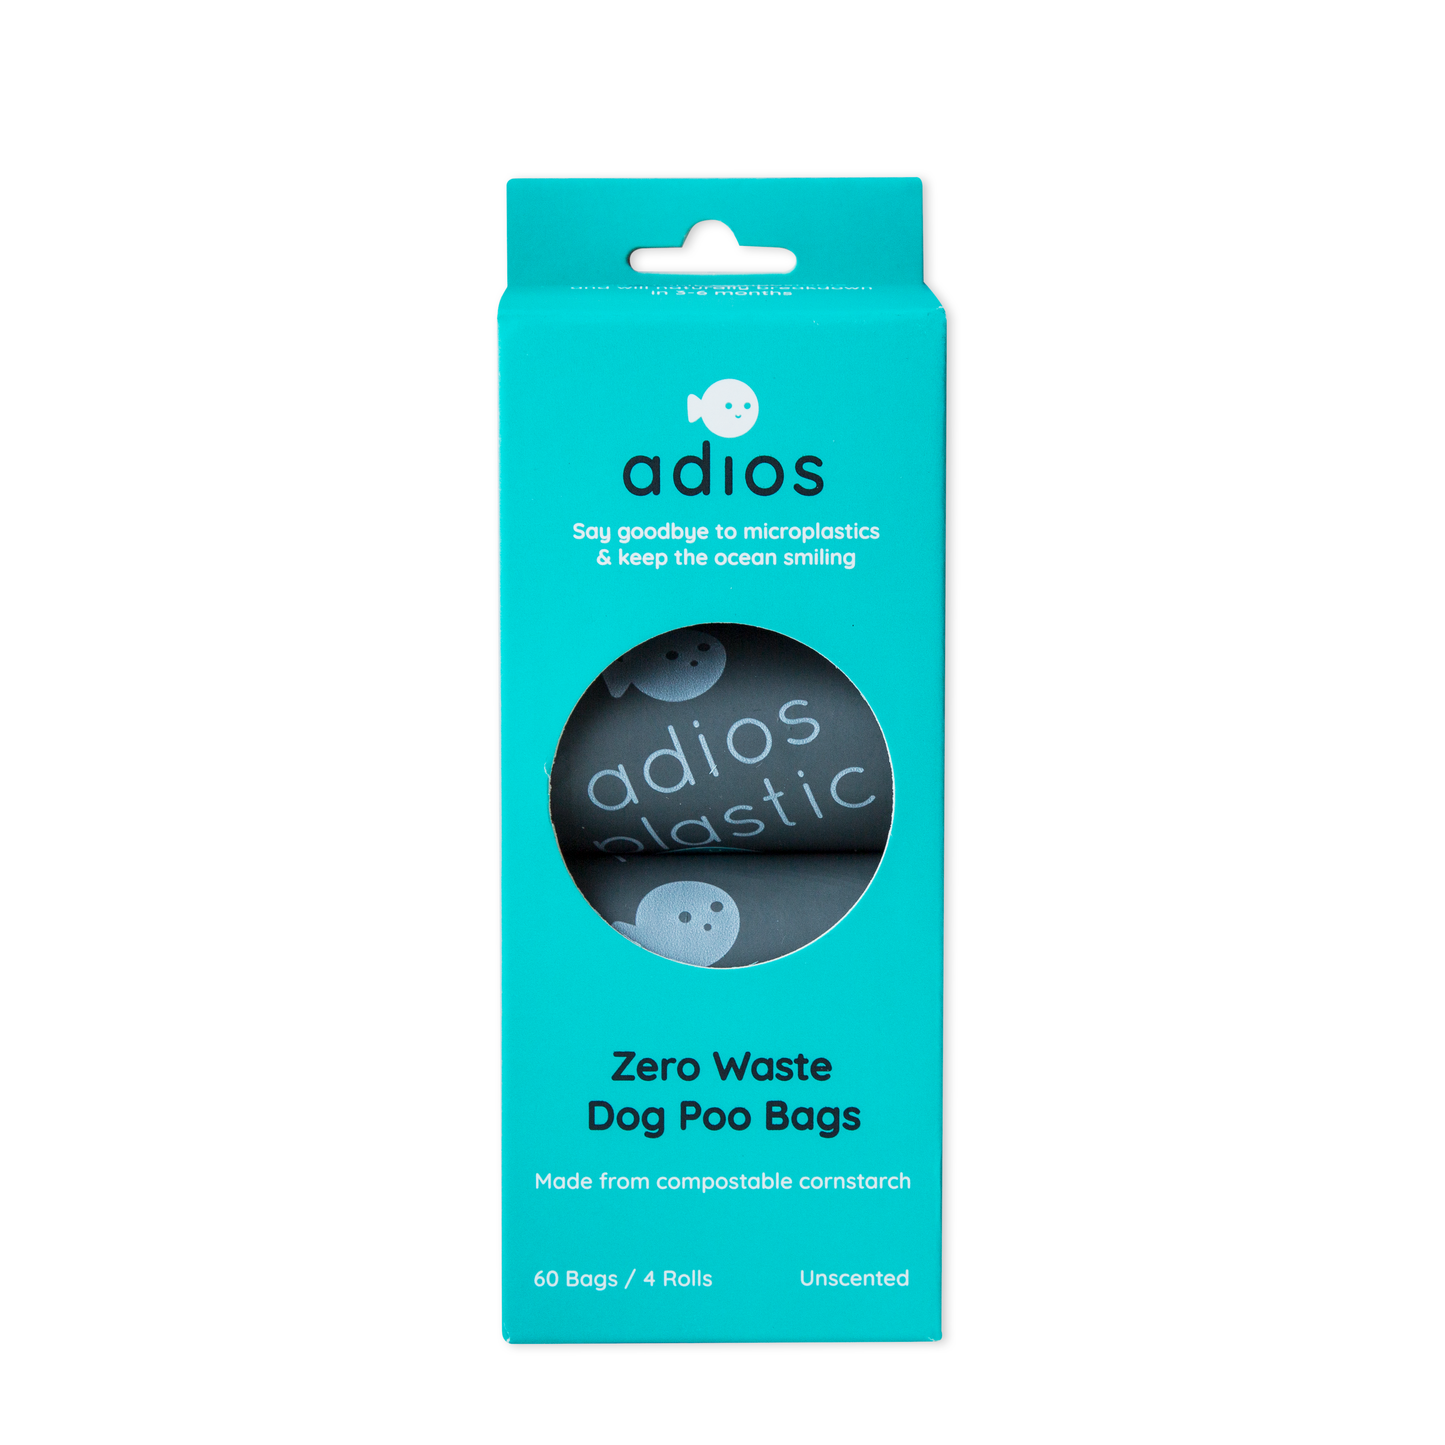 Adios Plastic Compostable Dog Poo Bags - 4 Rolls in Grey (60 Bags)